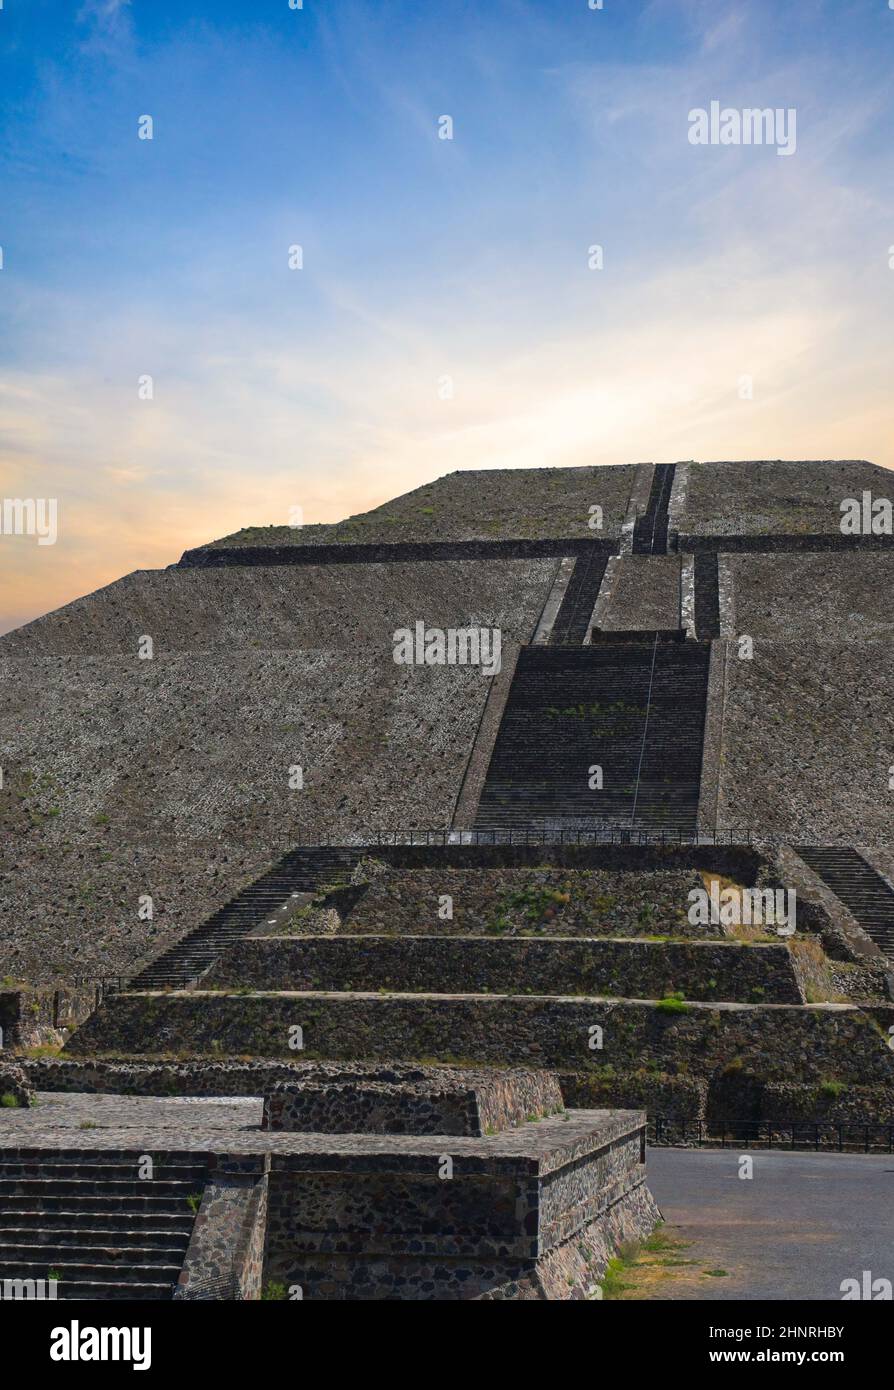 Pyramids of Teotihuacan, Archaeological Zone of Teotihuacan Mexico, Stock Photo